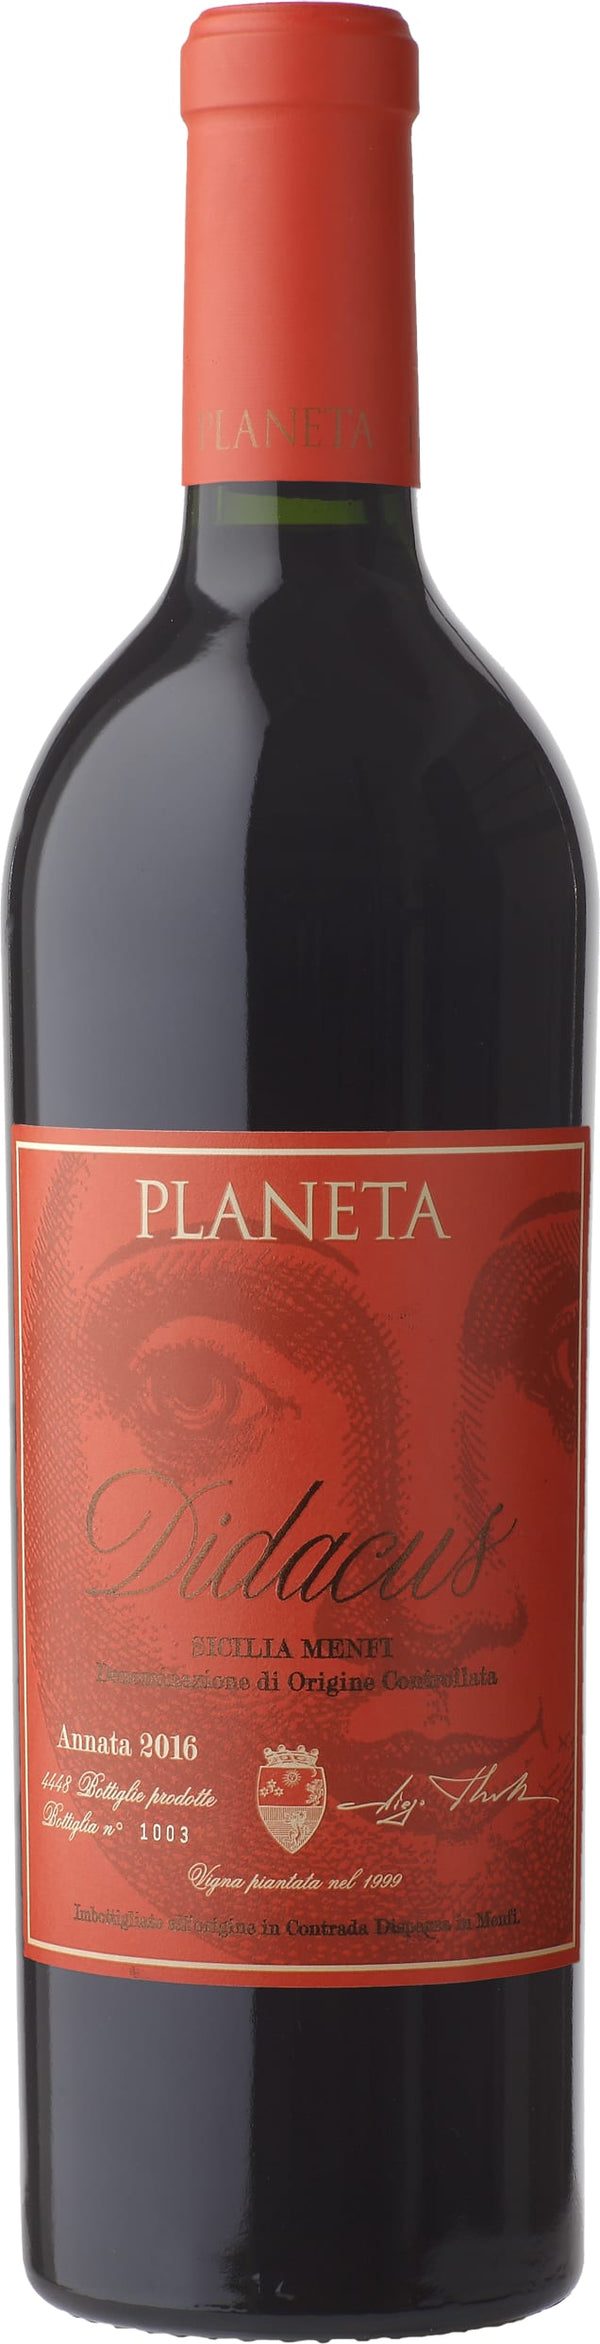 Planeta Didacus Rosso 2018 6x75cl - Just Wines 